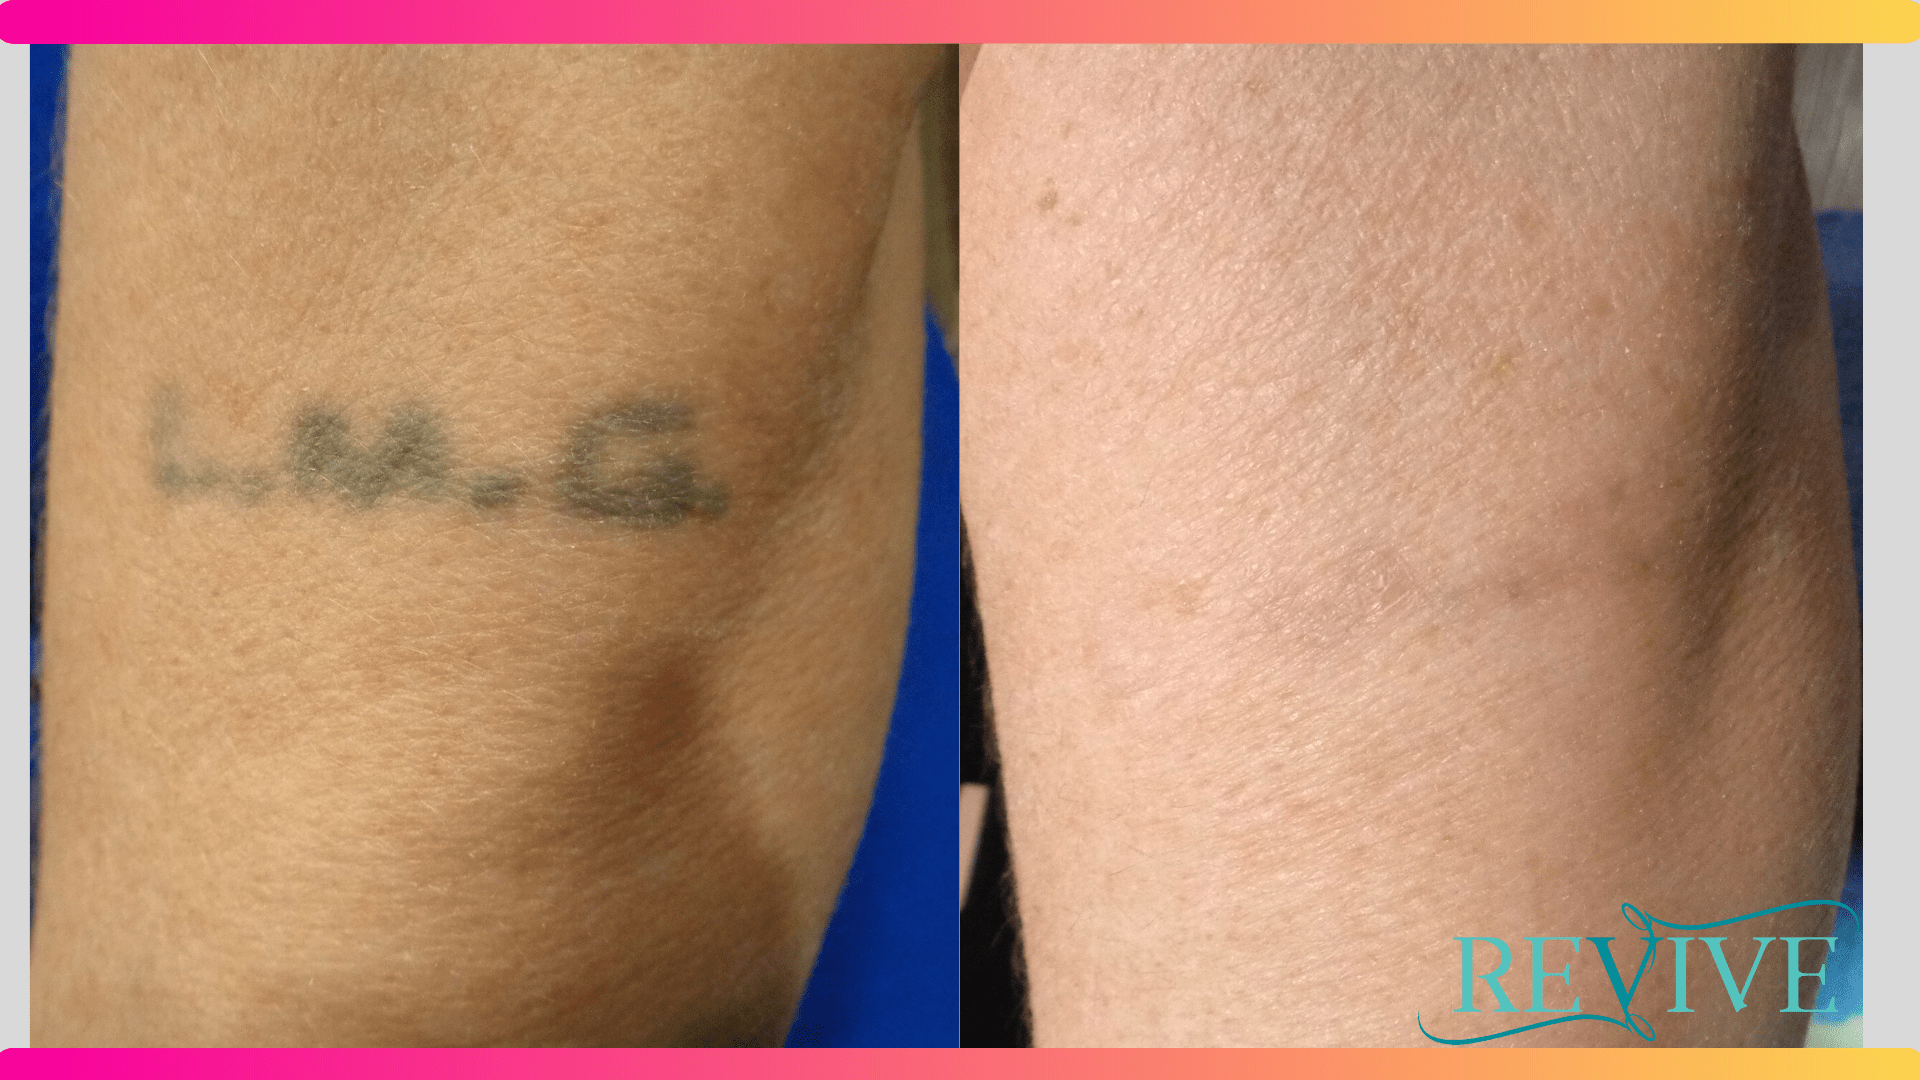 How Much Does Laser Tattoo Removal Cost? | Canstar